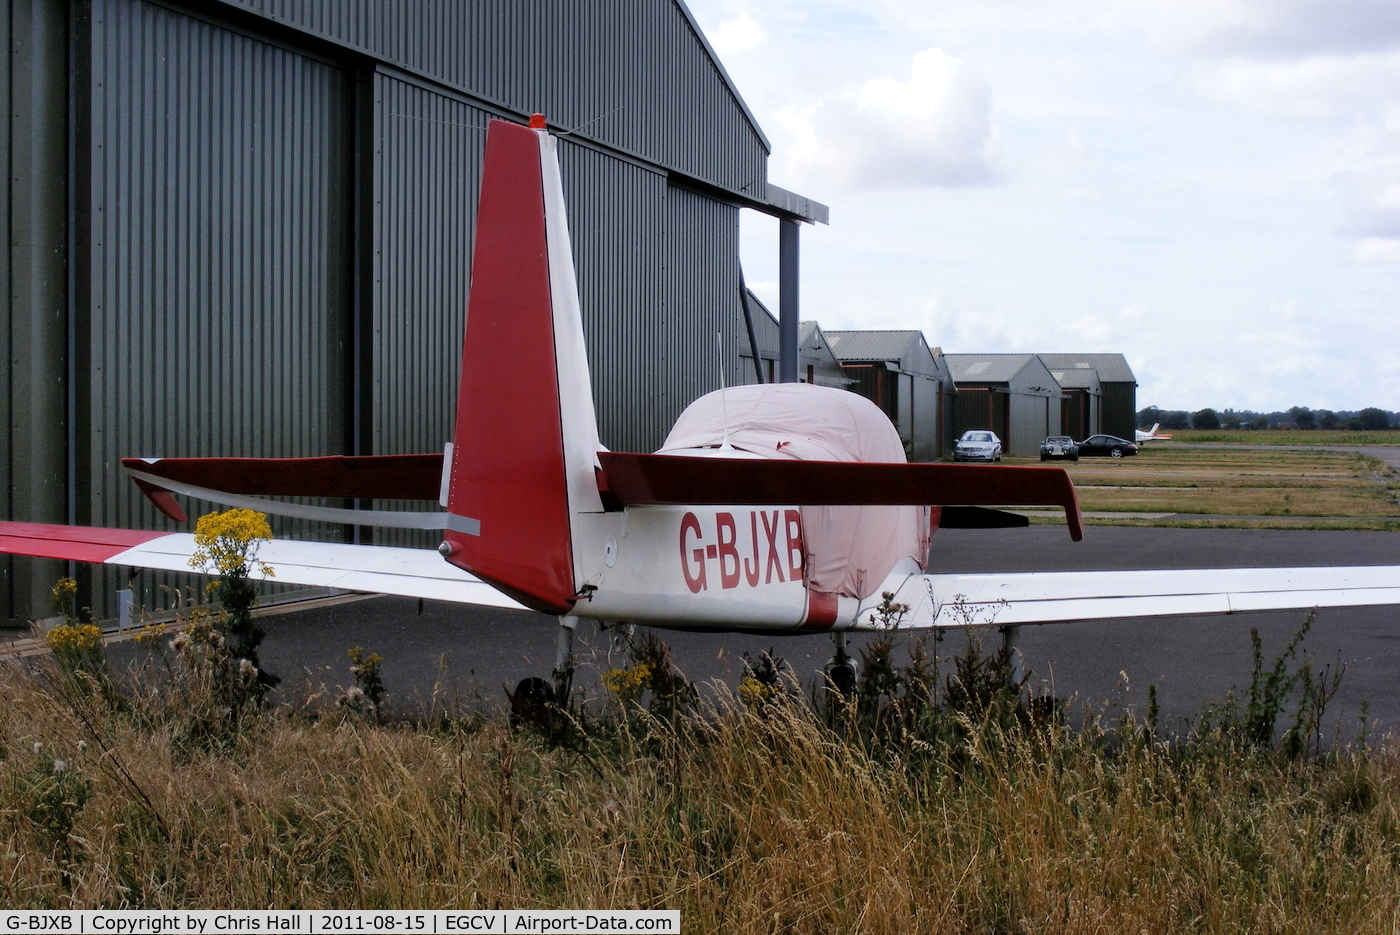 G-BJXB, 1982 Slingsby T-67A Firefly C/N 1995, normally based at at Crosland Moor Airfield